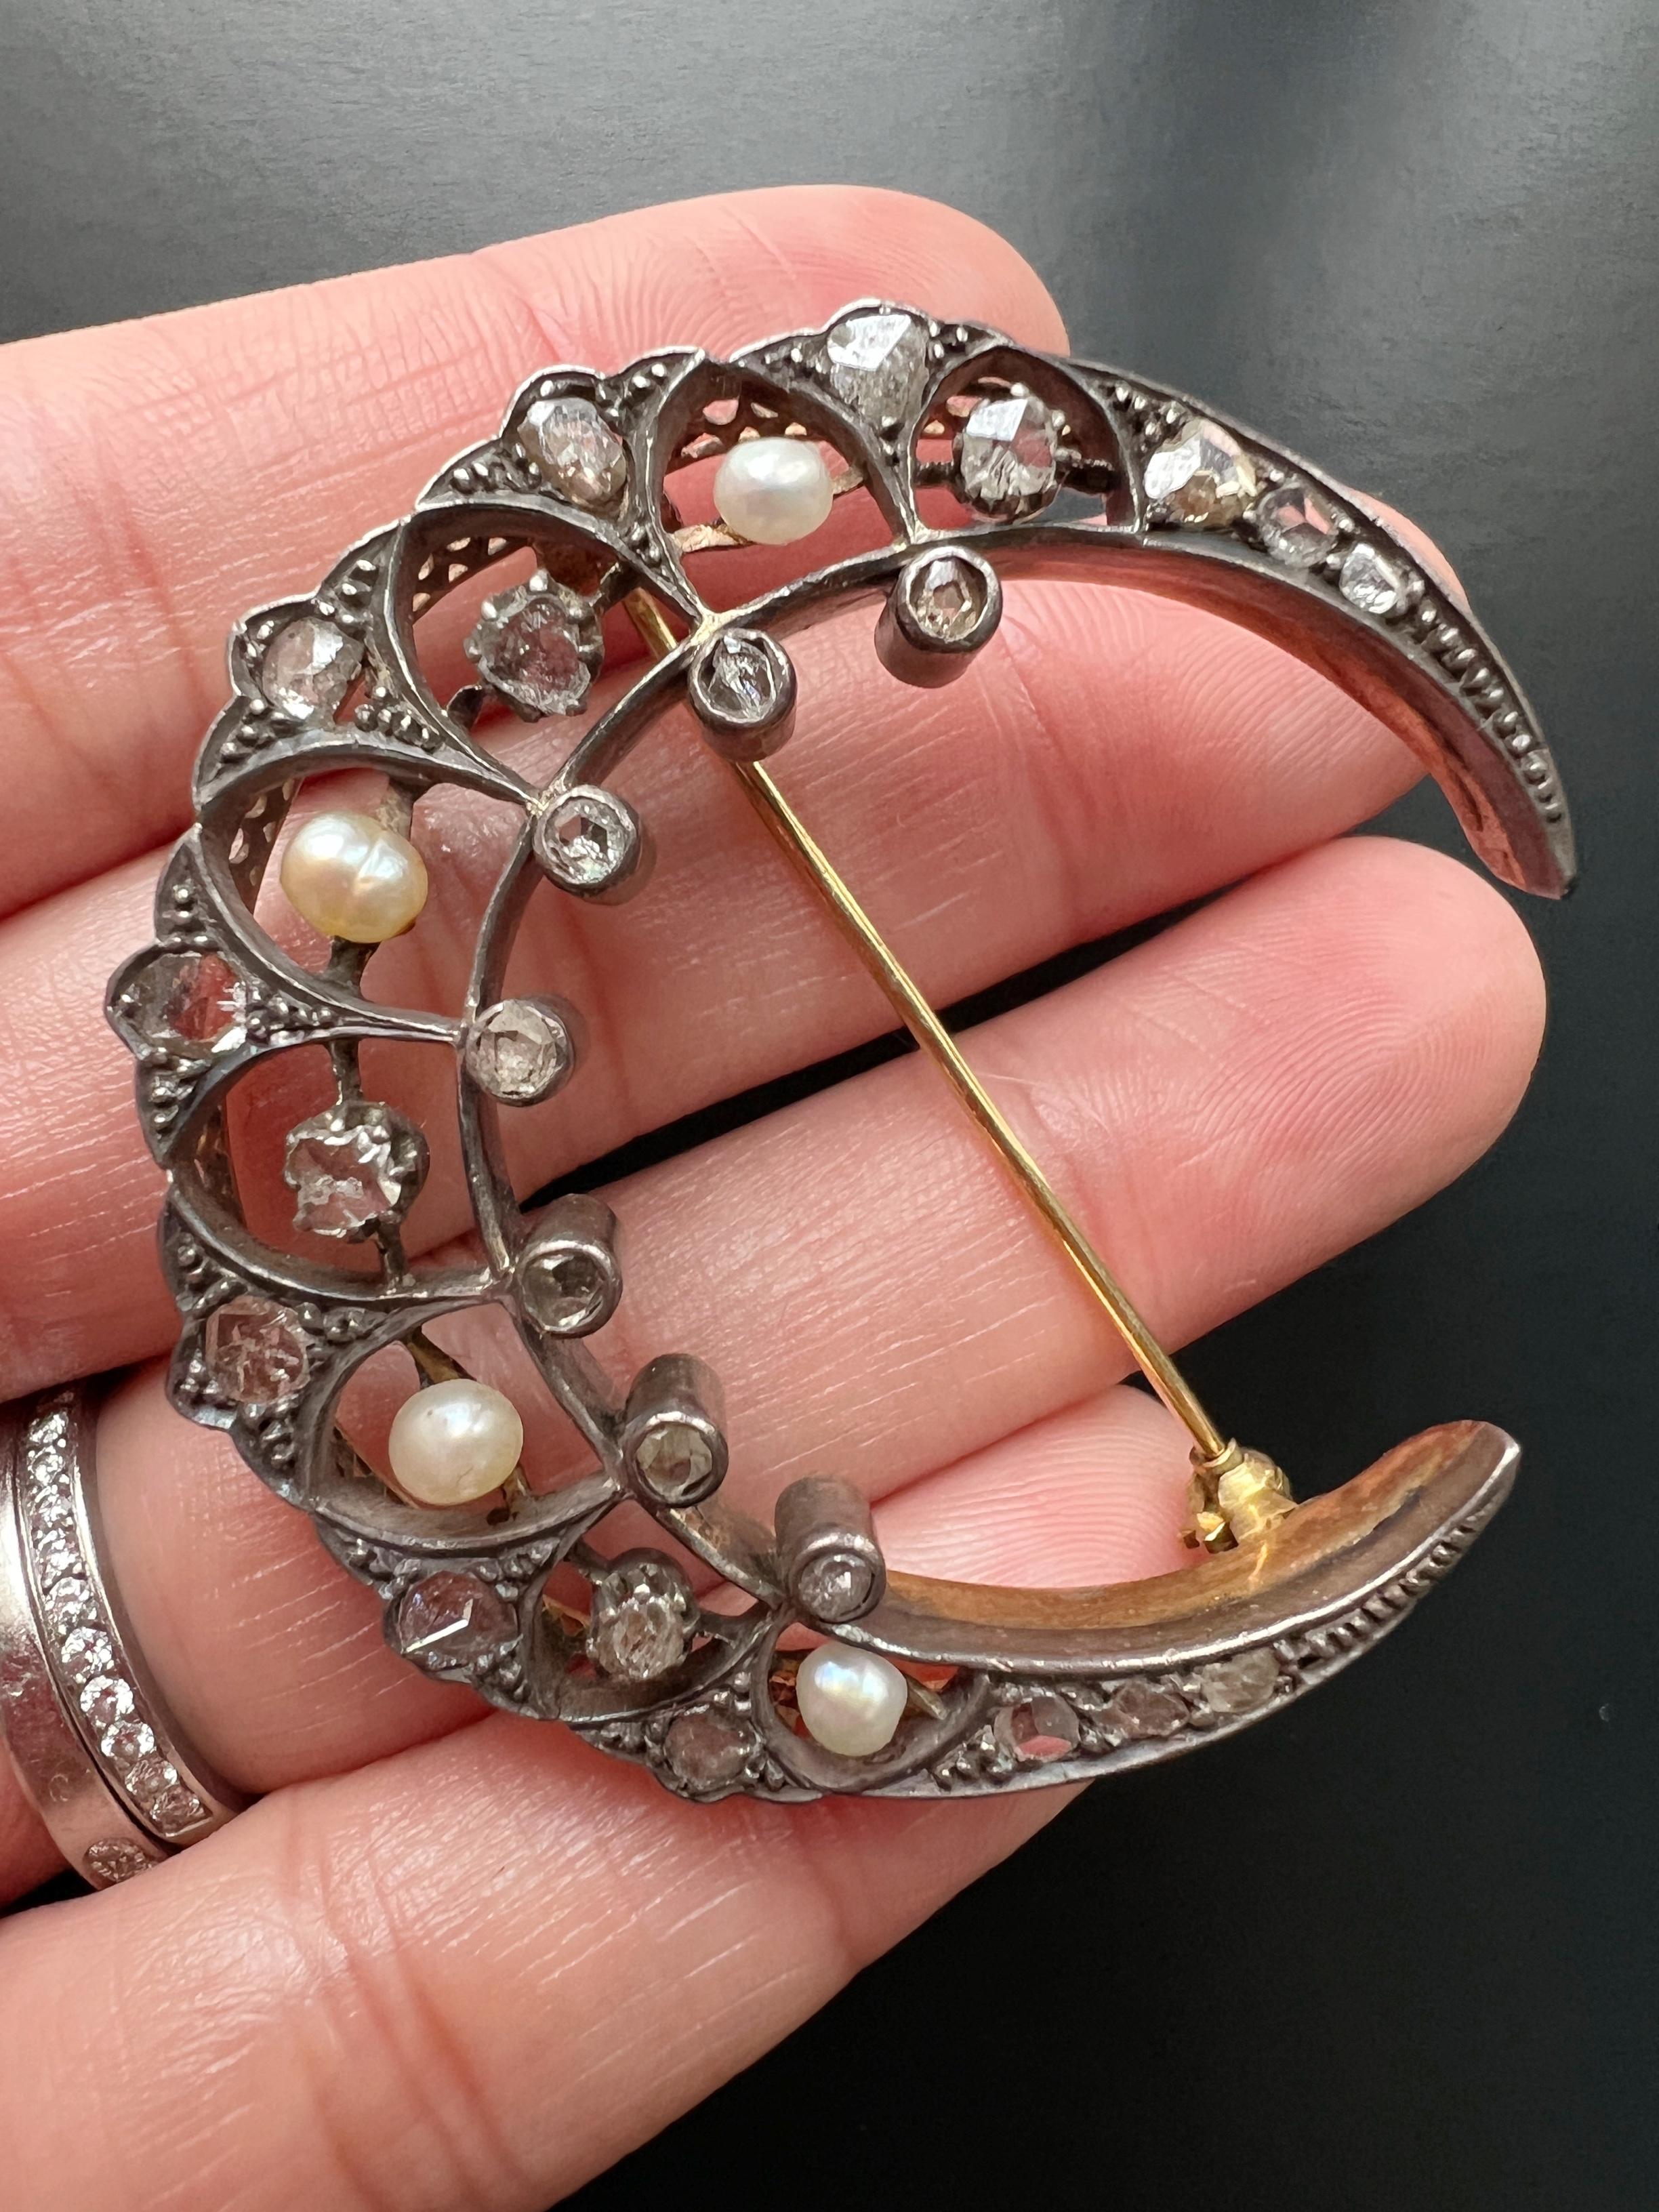 We absolutely love everything in this amazing large Victorian Crescent brooch: Its incredibly large size and hefty weight, its elegant silver on gold mounting (the diamonds are mounted in silver and the brooch in 18K yellow gold which is typical to